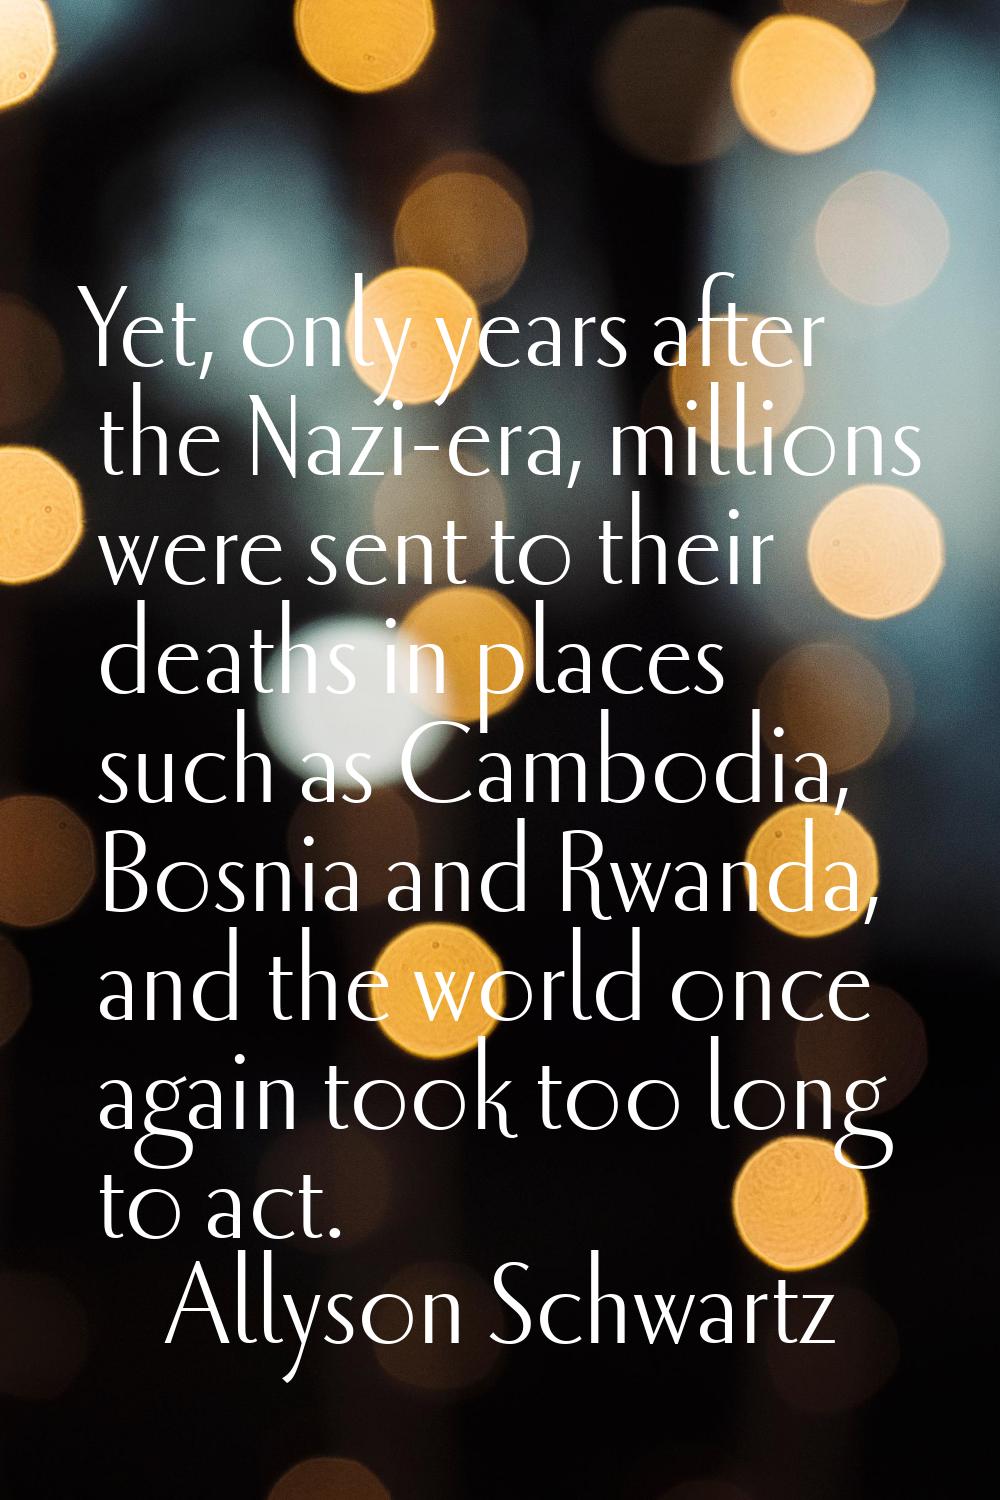 Yet, only years after the Nazi-era, millions were sent to their deaths in places such as Cambodia, 